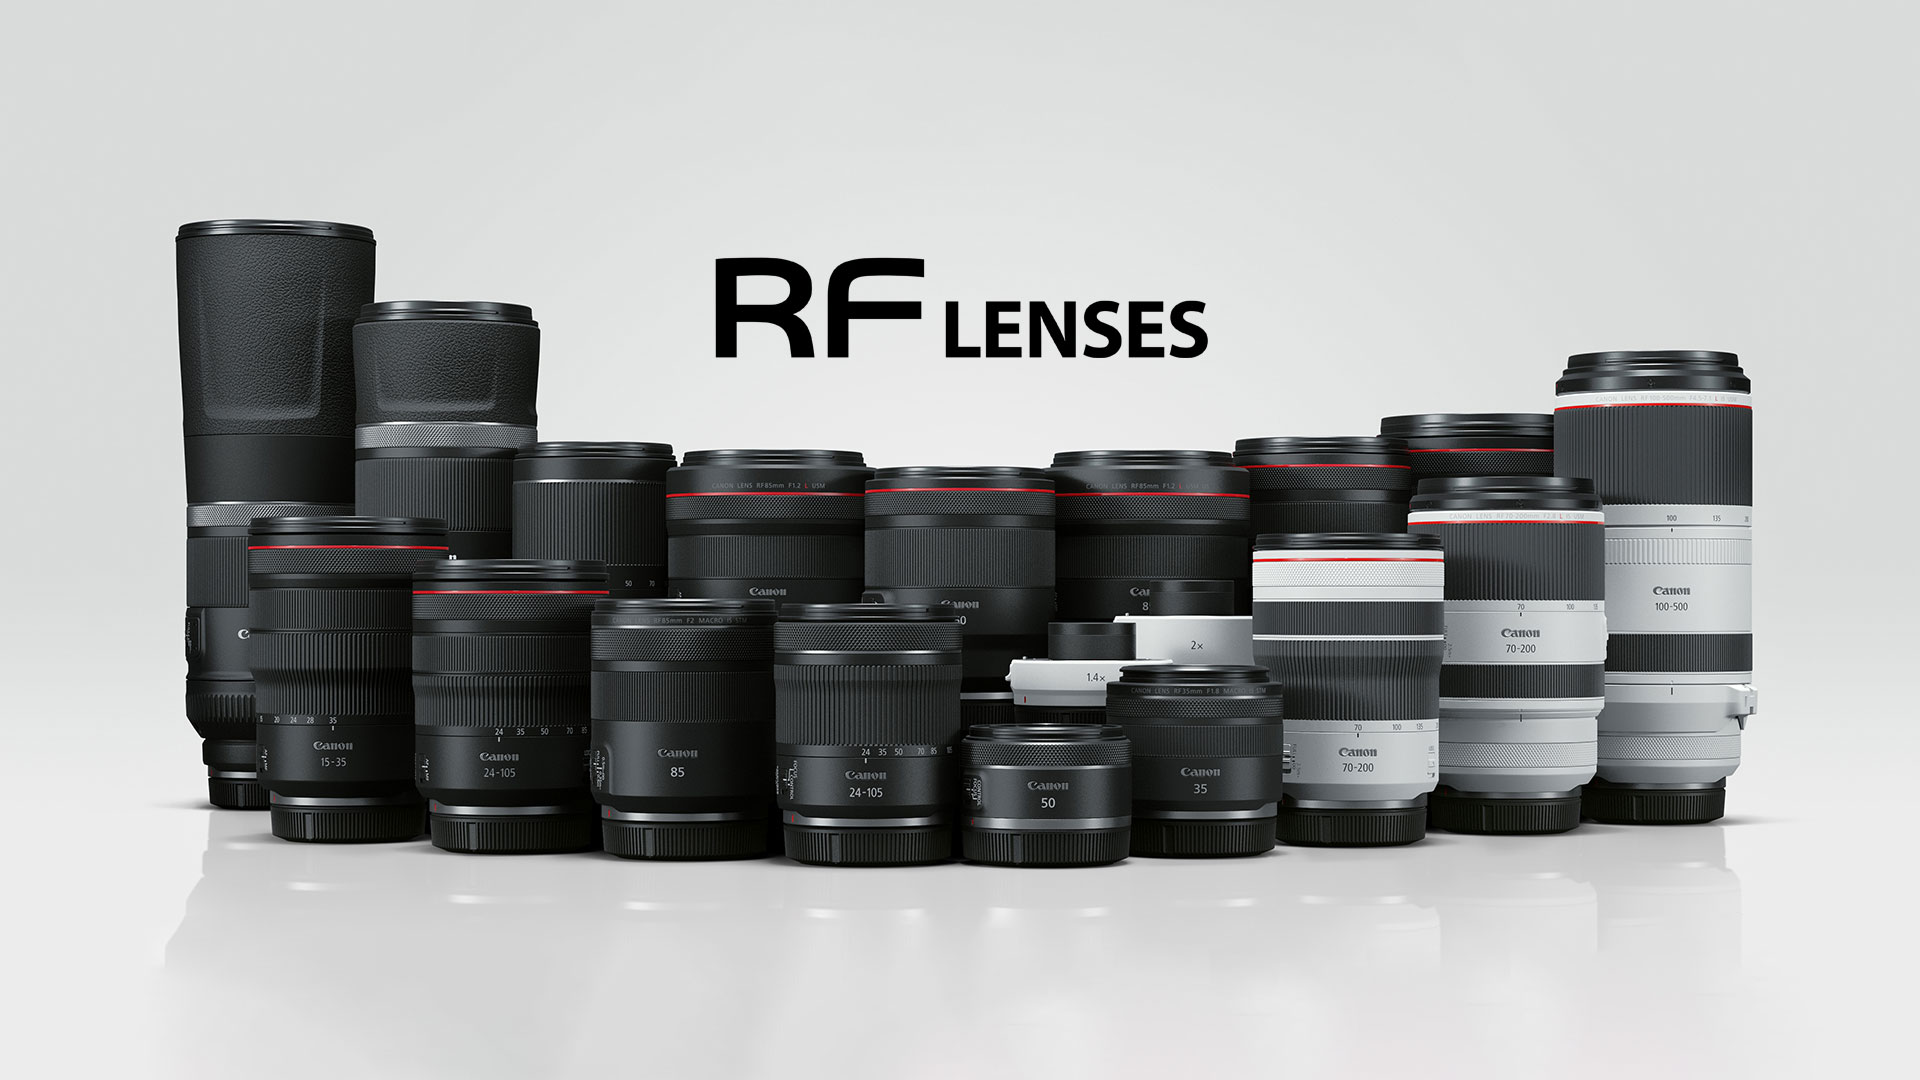 Canon's Growth Strategy - 32 New RF Lenses by 2025